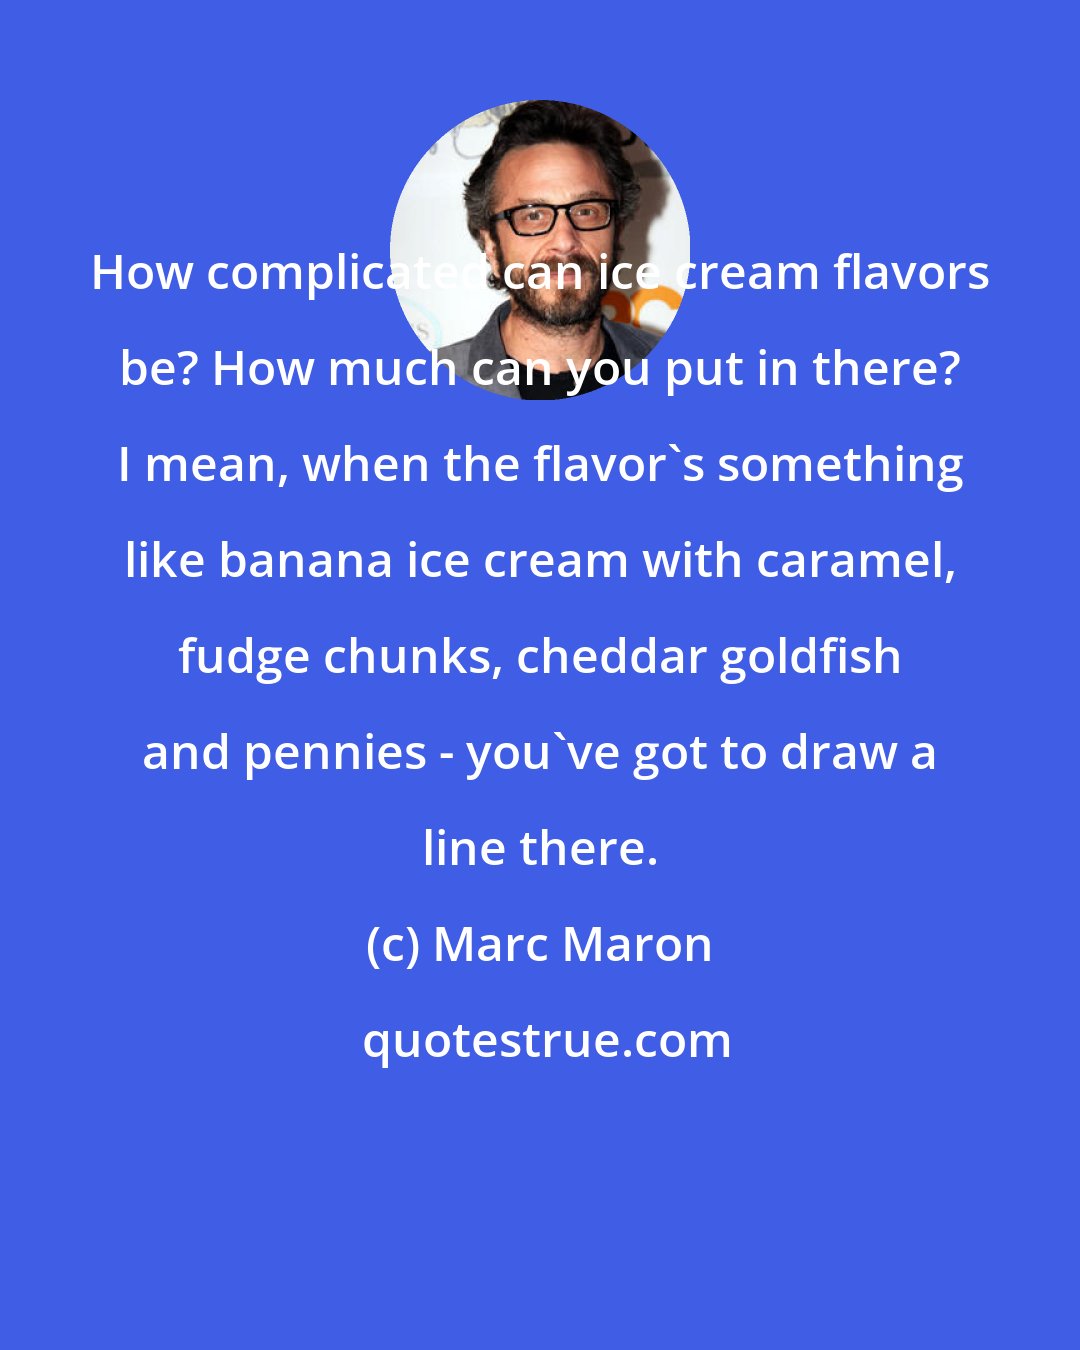 Marc Maron: How complicated can ice cream flavors be? How much can you put in there? I mean, when the flavor's something like banana ice cream with caramel, fudge chunks, cheddar goldfish and pennies - you've got to draw a line there.